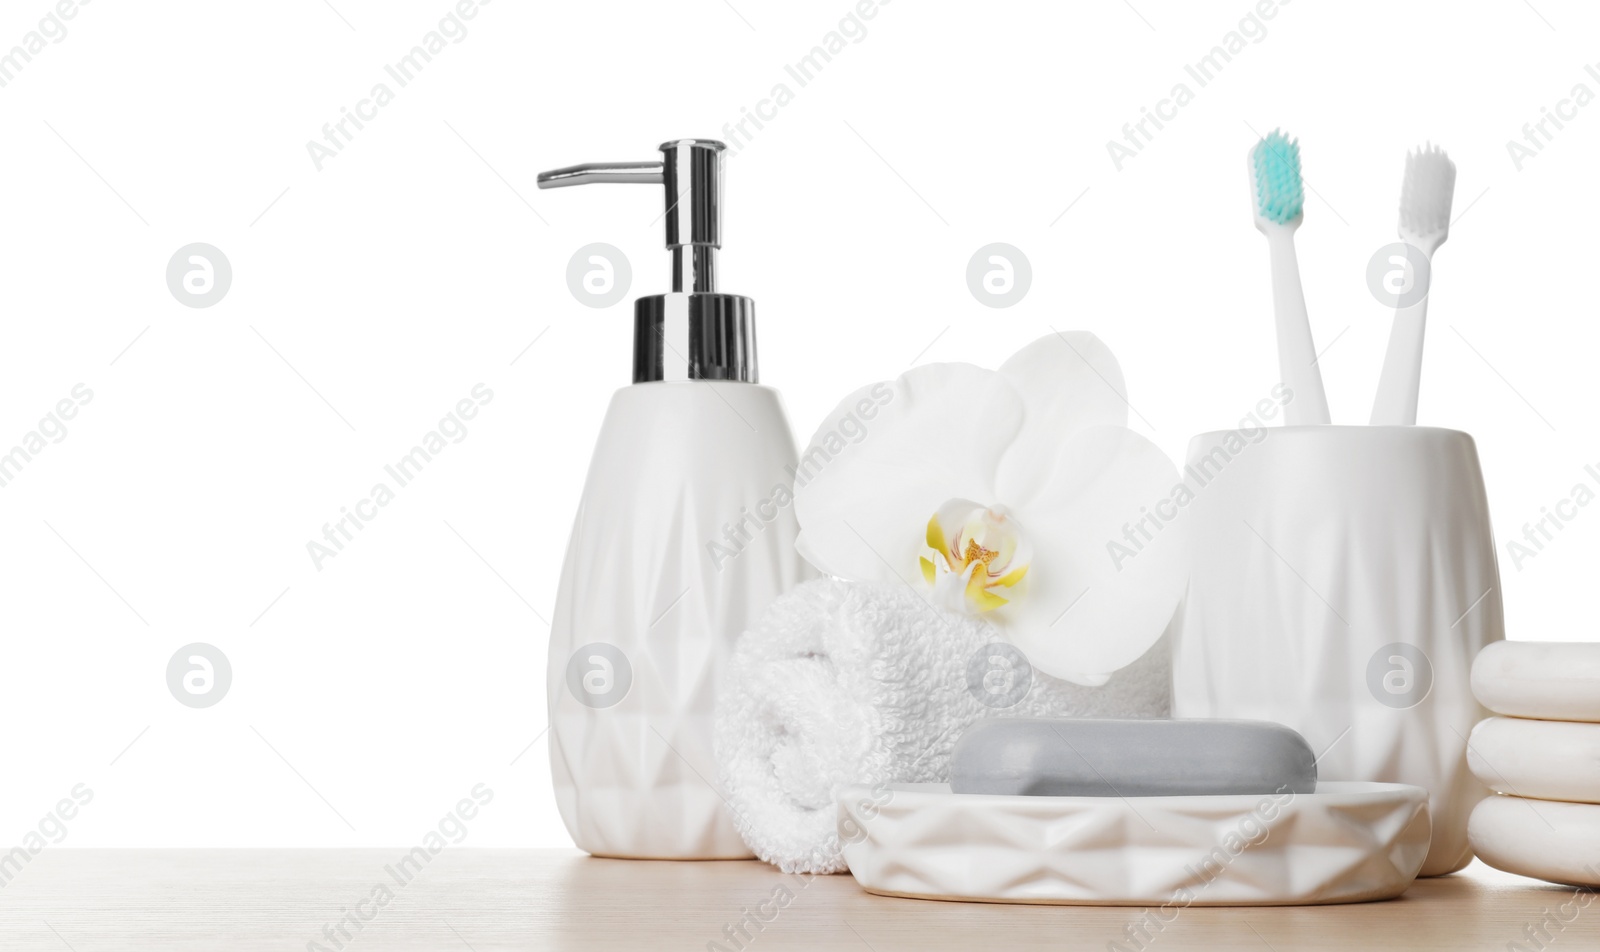 Photo of Bath accessories. Different personal care products and flower on wooden table against white background. Space for text